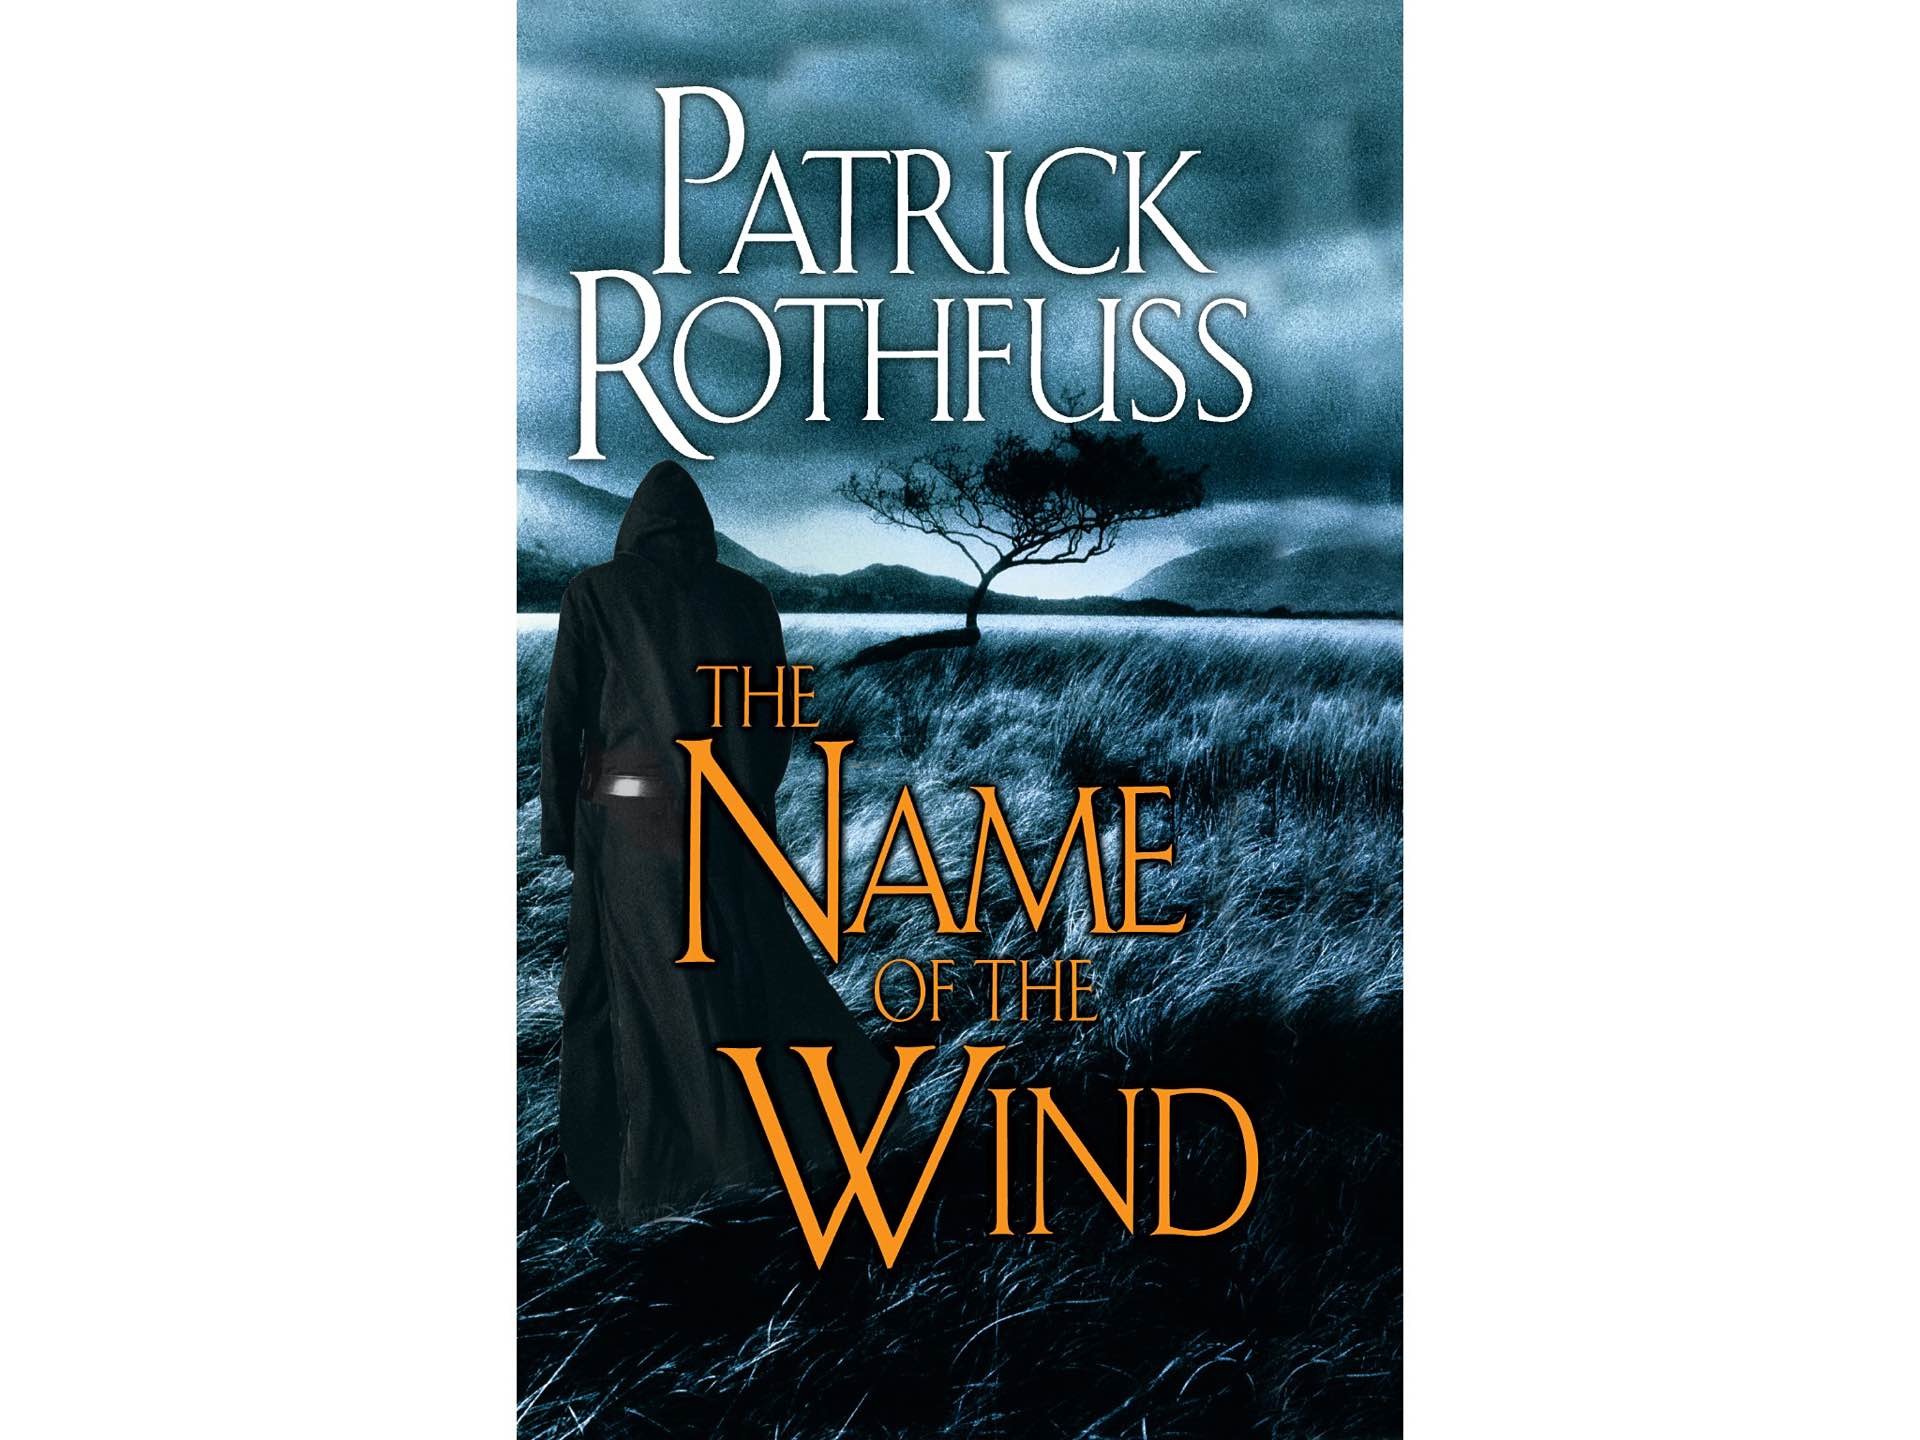 The Name of the Wind by Patrick Rothfuss.